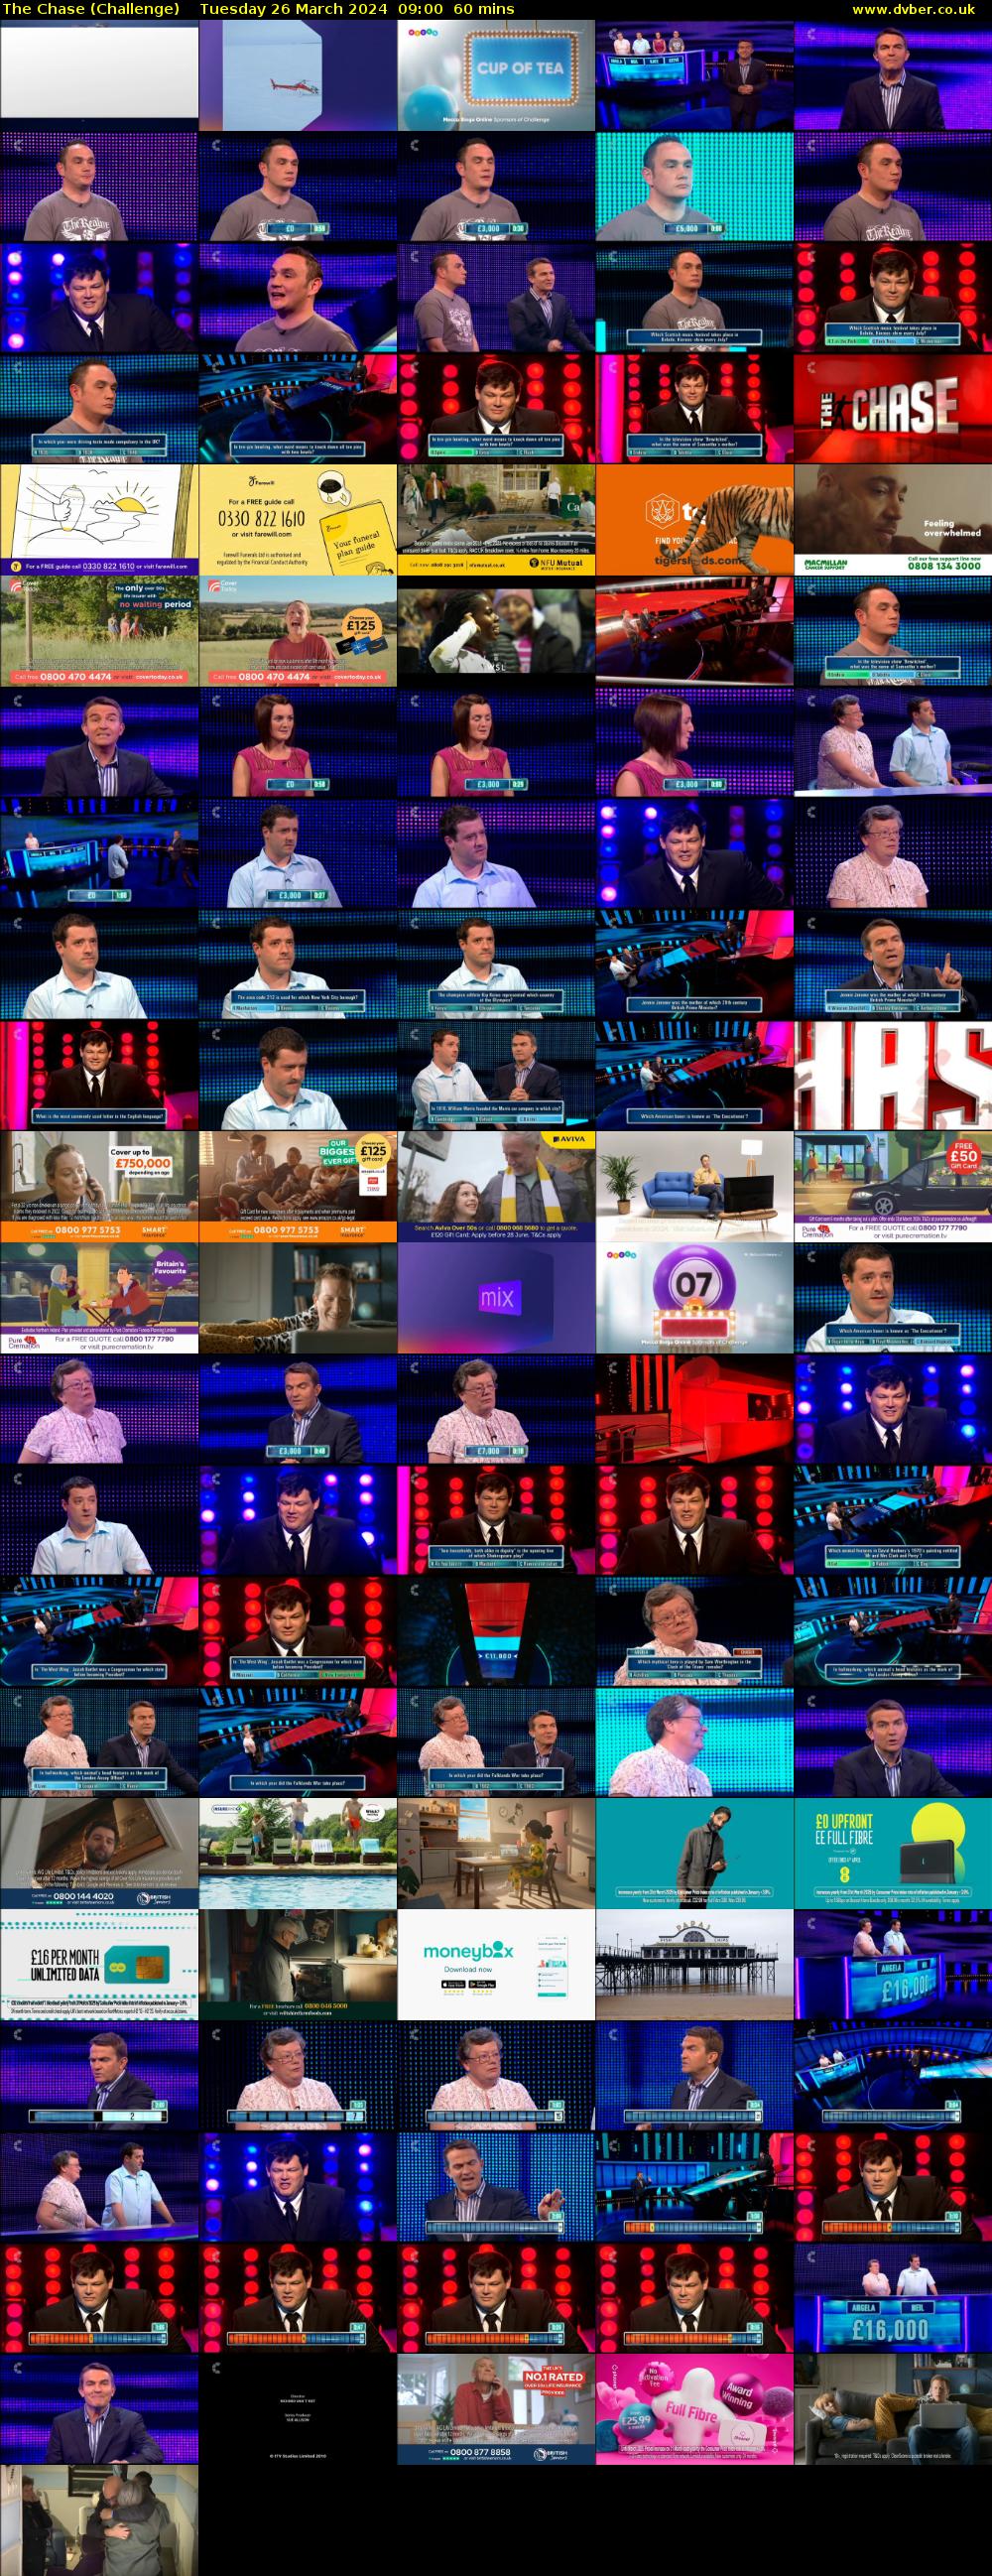 The Chase (Challenge) Tuesday 26 March 2024 09:00 - 10:00